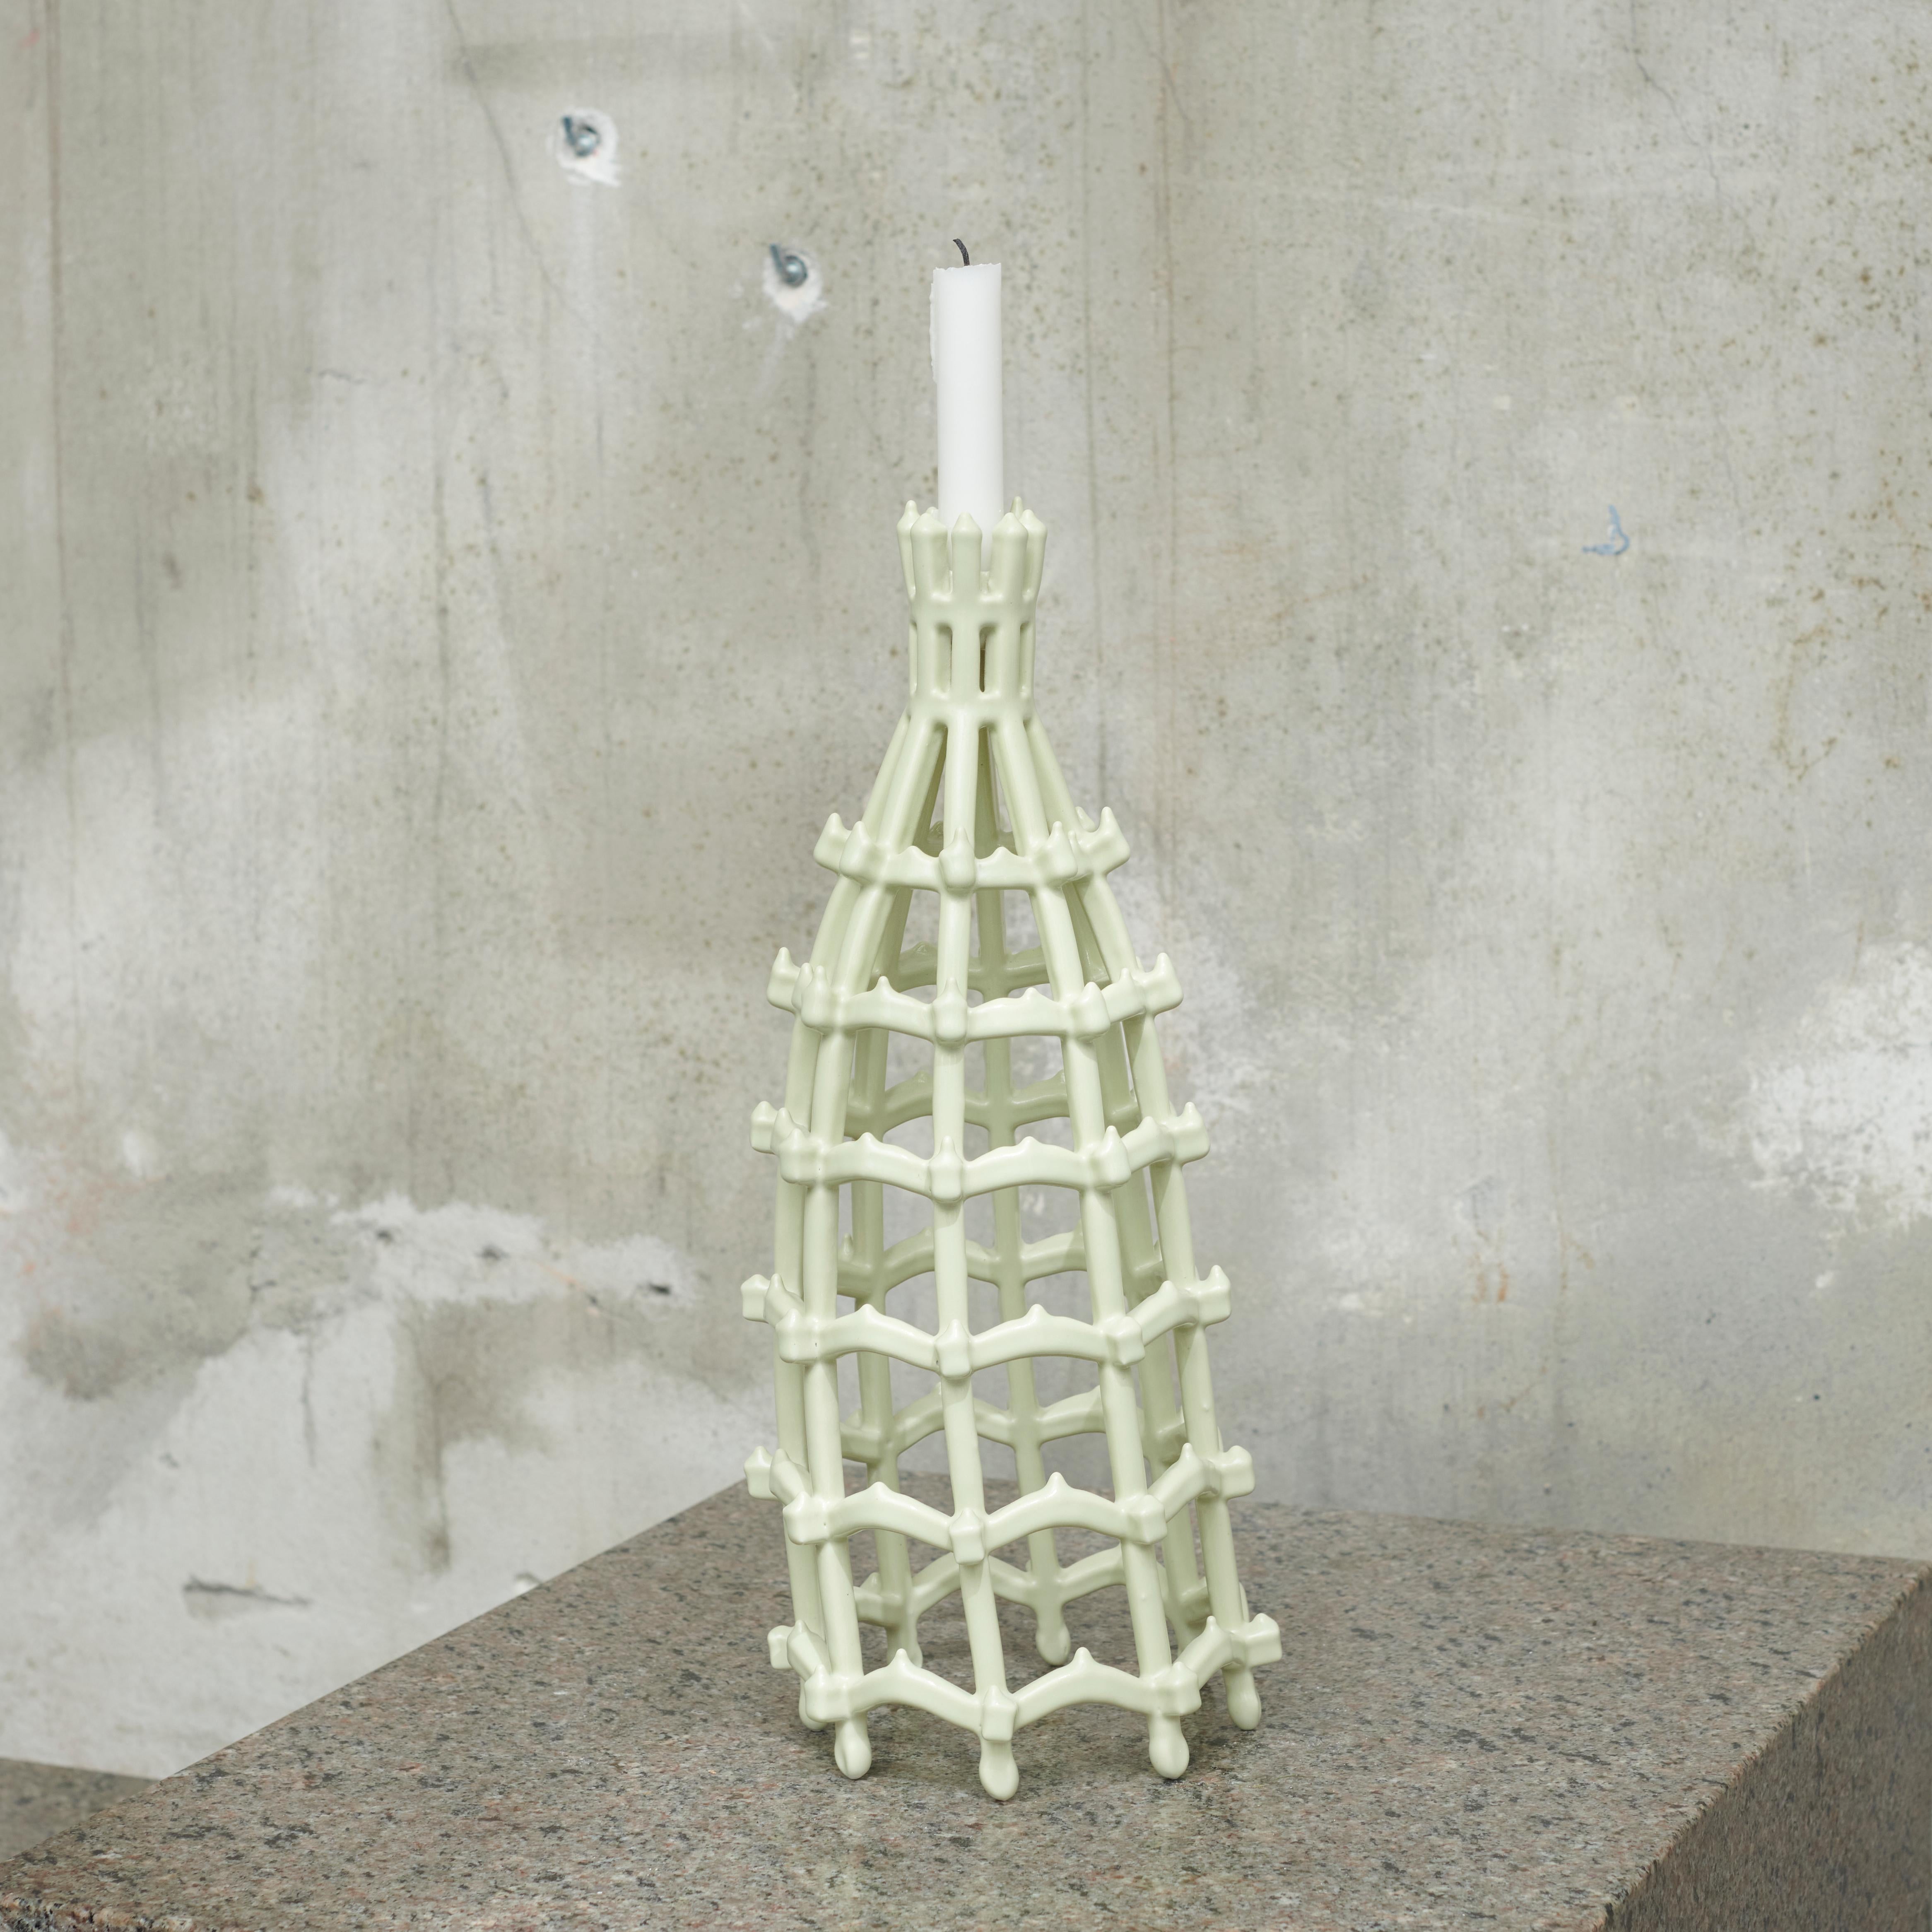 A handmade and one of a kind candleholder made in porcelain by artist duo Atelier Fig. 
Made by using a unique method developed by the artist duo using glazed hand-cut and sewn sponges. The material is dipped in the glaze and hereafter burned in the